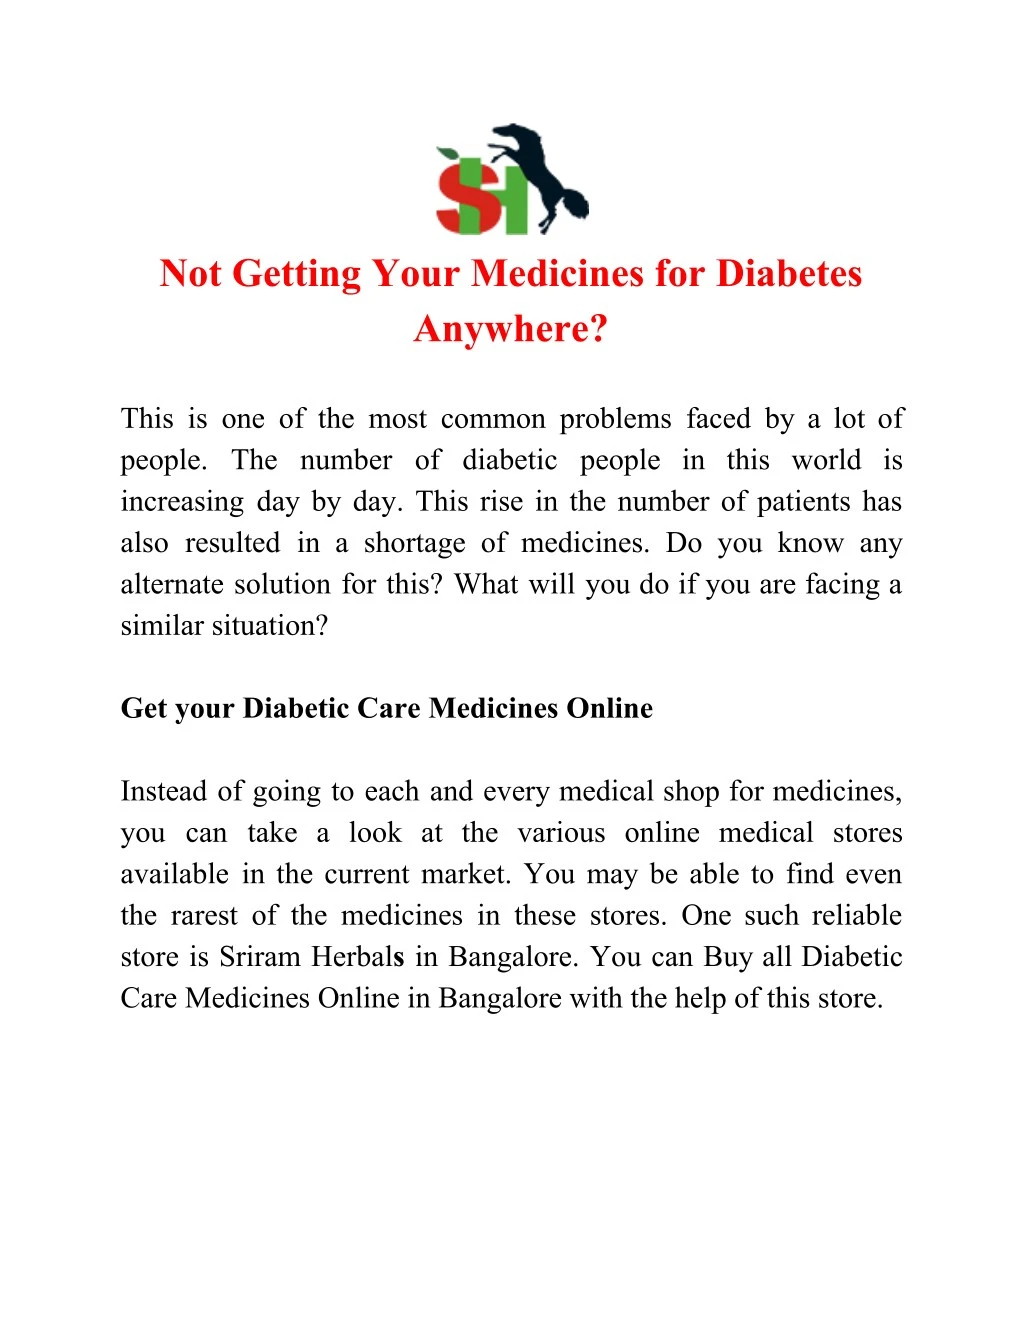 not getting your medicines for diabetes anywhere